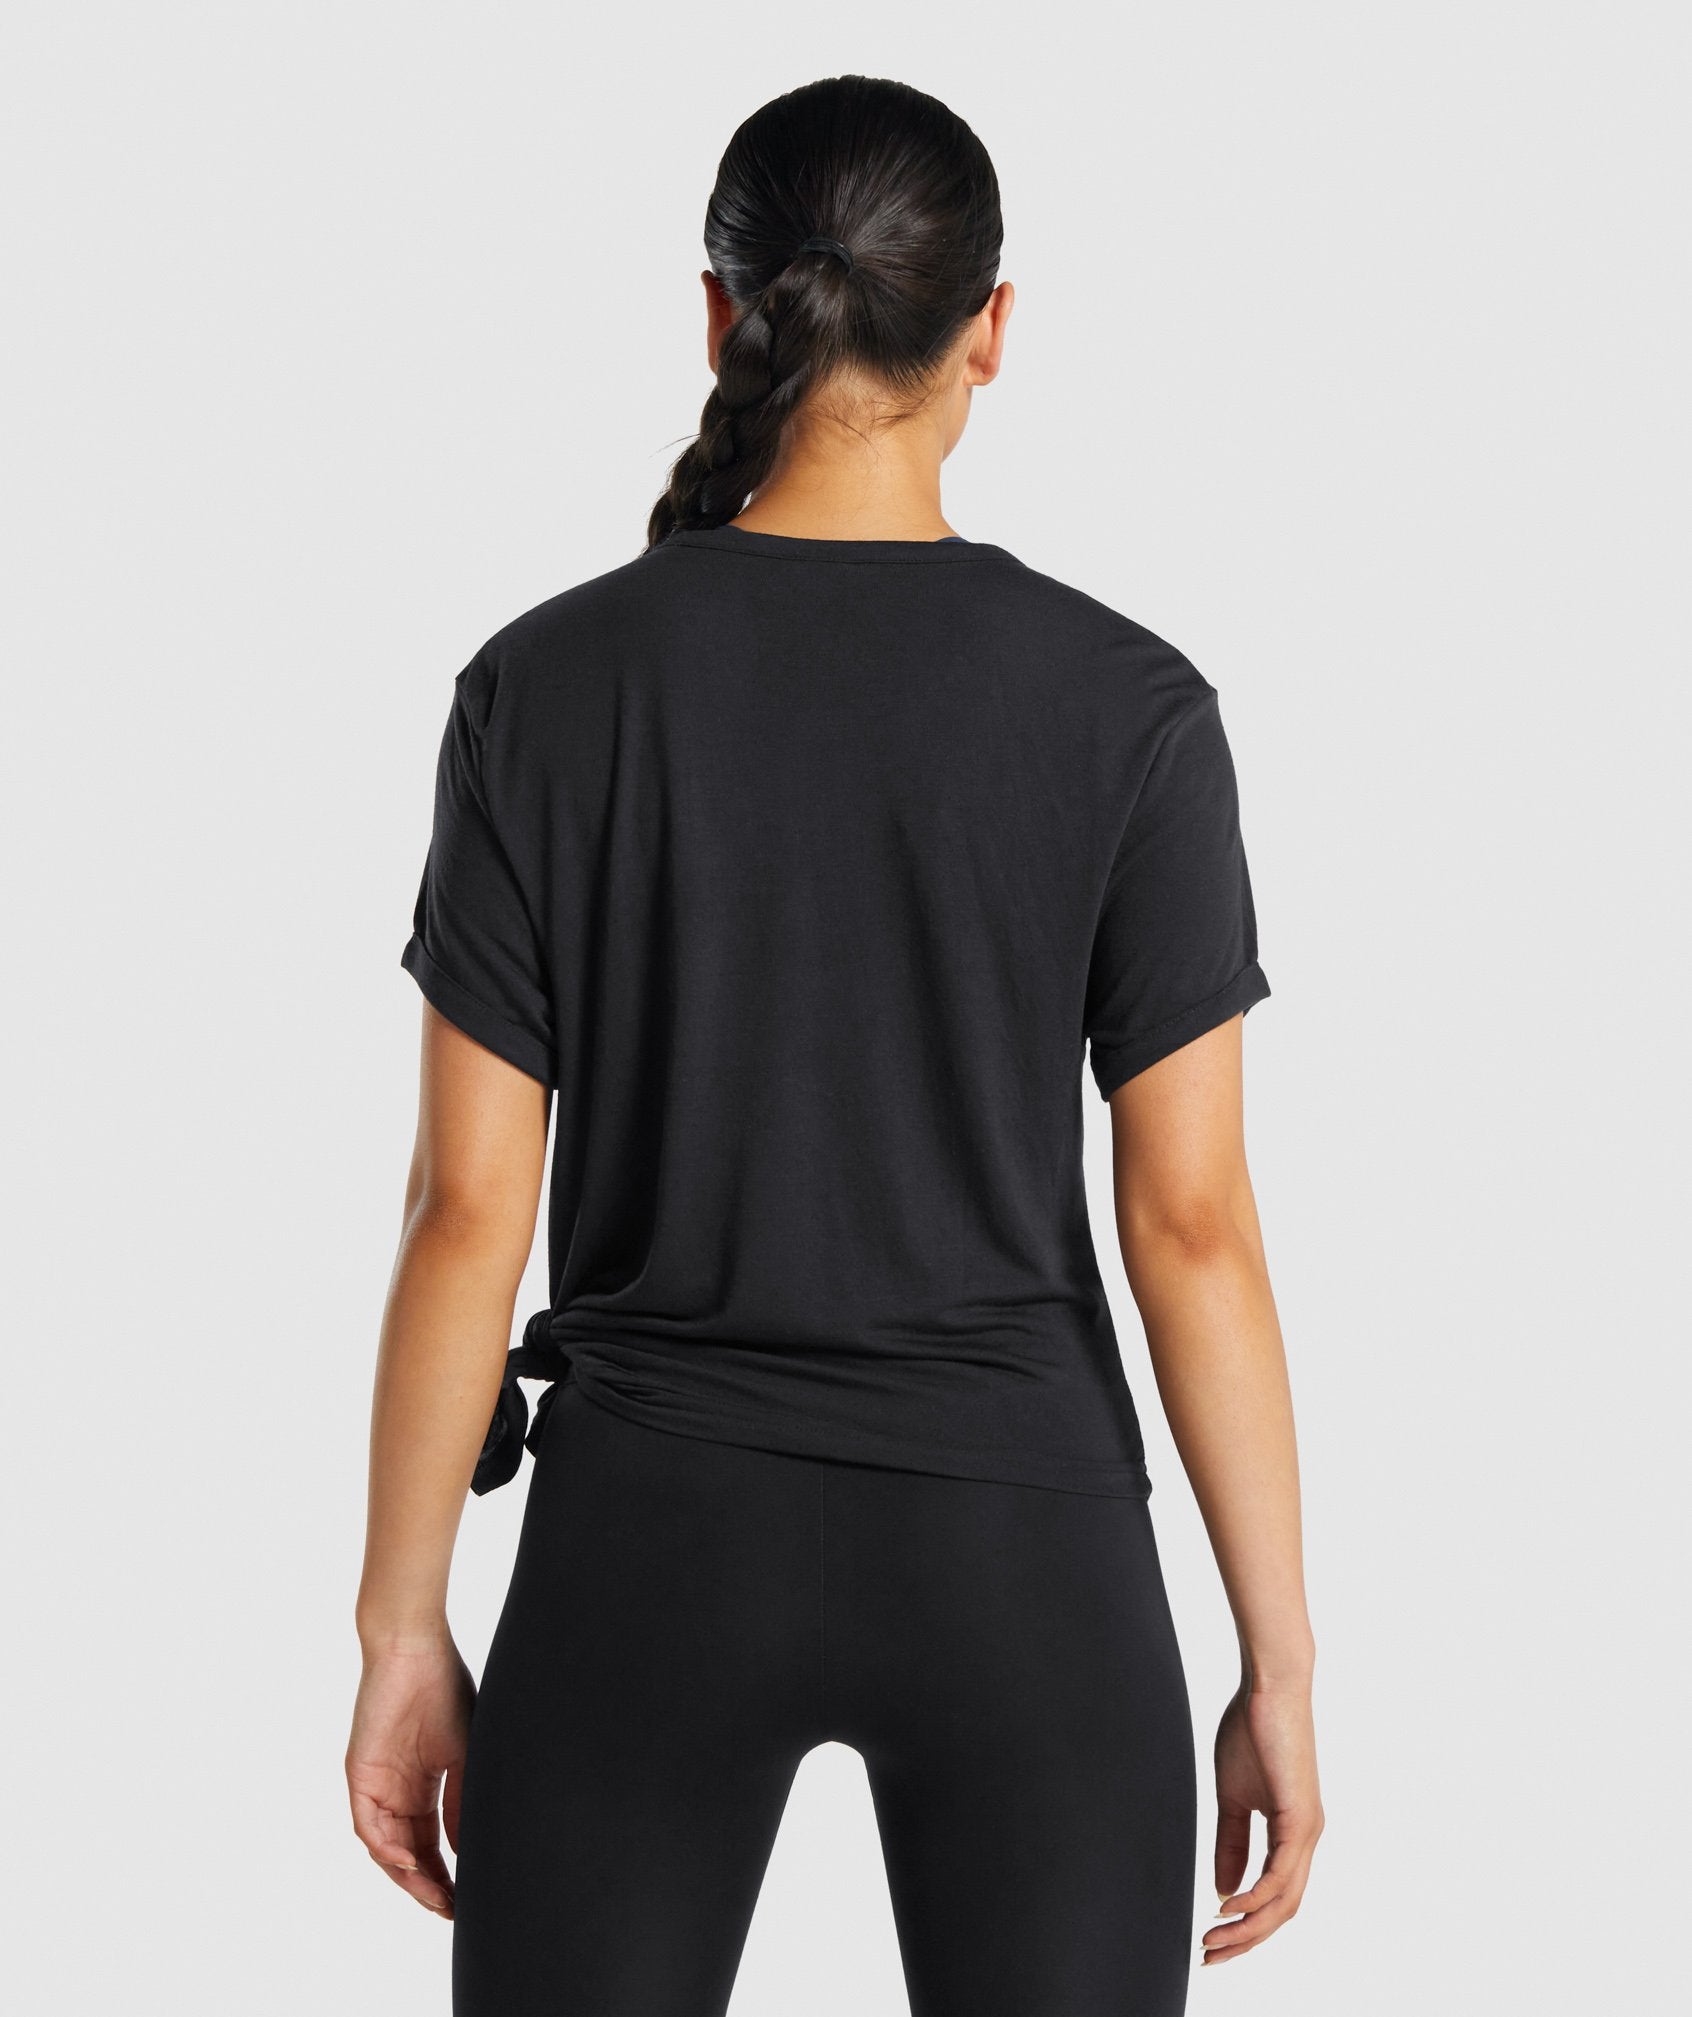 Essential T-Shirt in Black - view 2